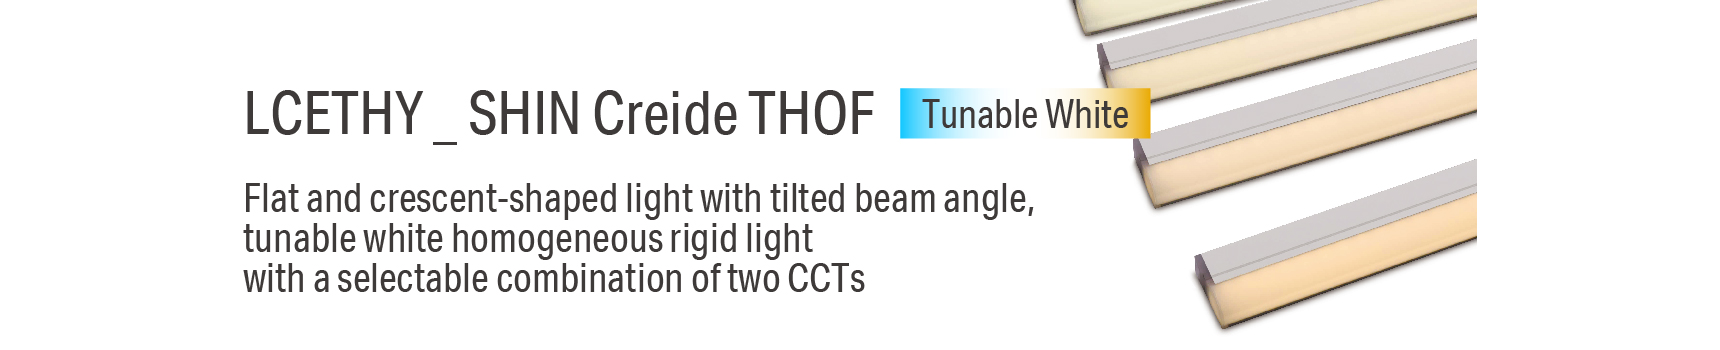 LCETHY _ SHIN Creide THOF Flat and crescent-shaped light with tilted beam angle, tunable white homogeneous rigid light with a selectable combination of two CCTs